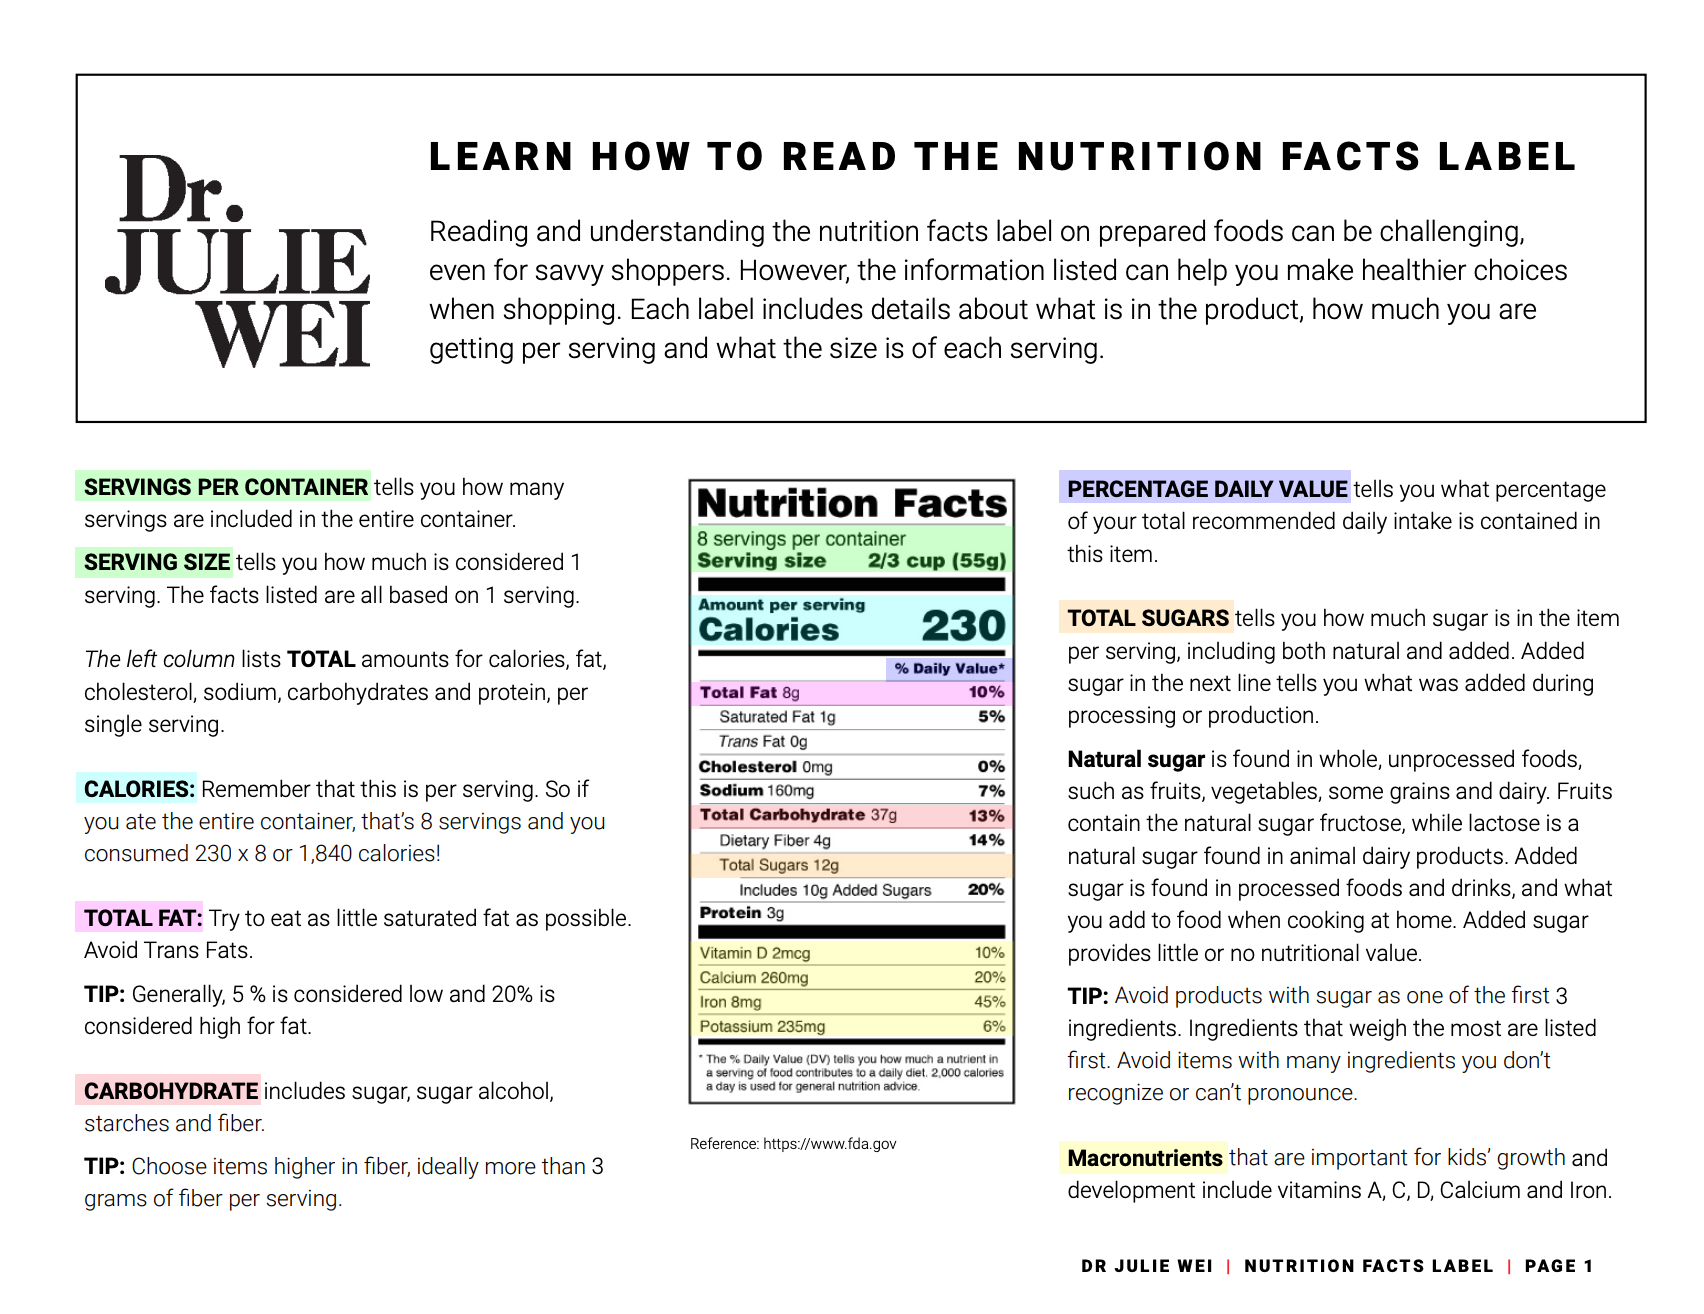 Chart describing what the items on a nutrition facts label mean